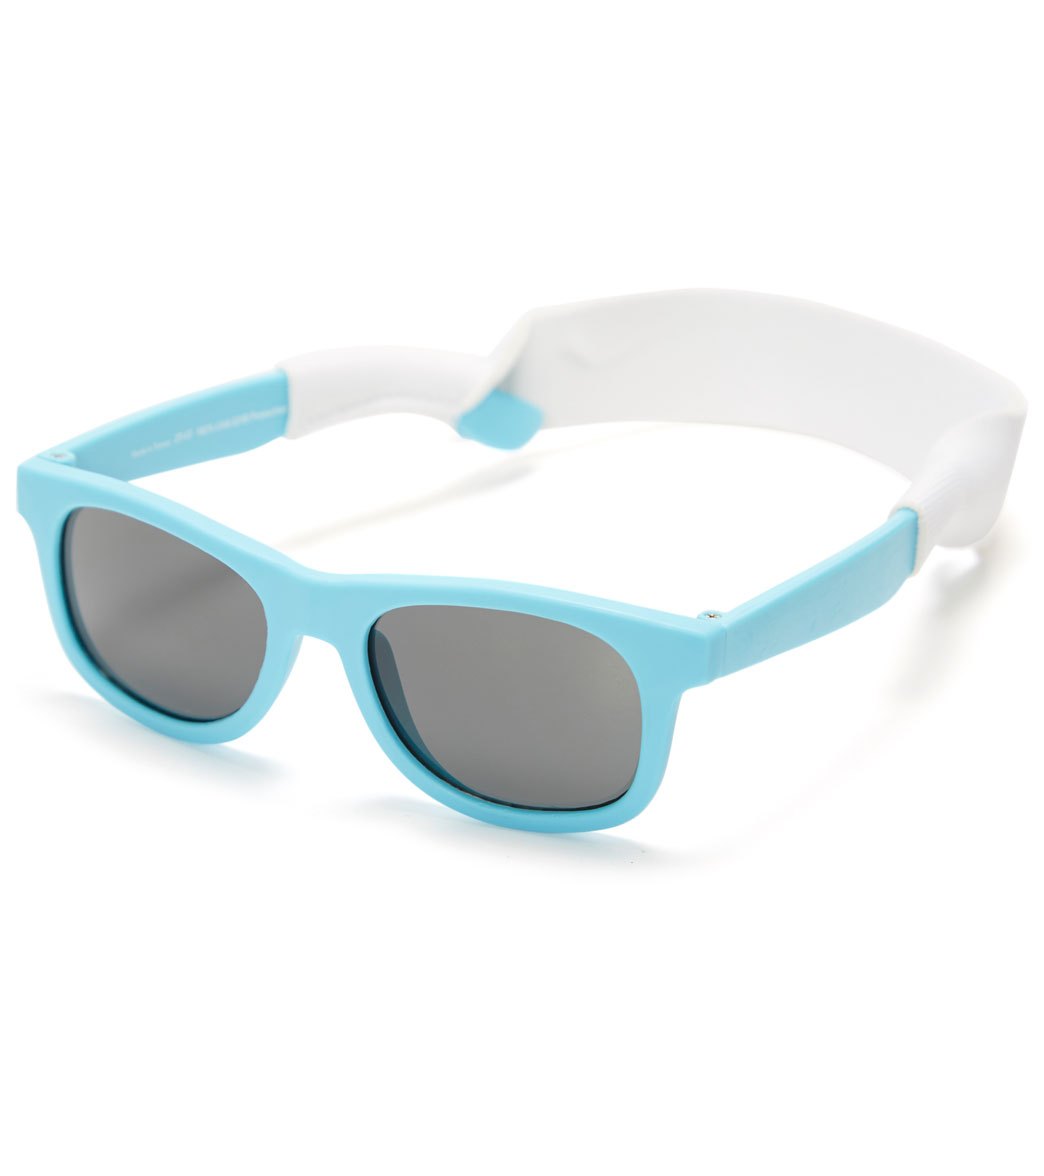 I Play. By Green Sprouts Flexible Sunglasses Baby - Aqua 0-24 Months 100% Rubber - Swimoutlet.com